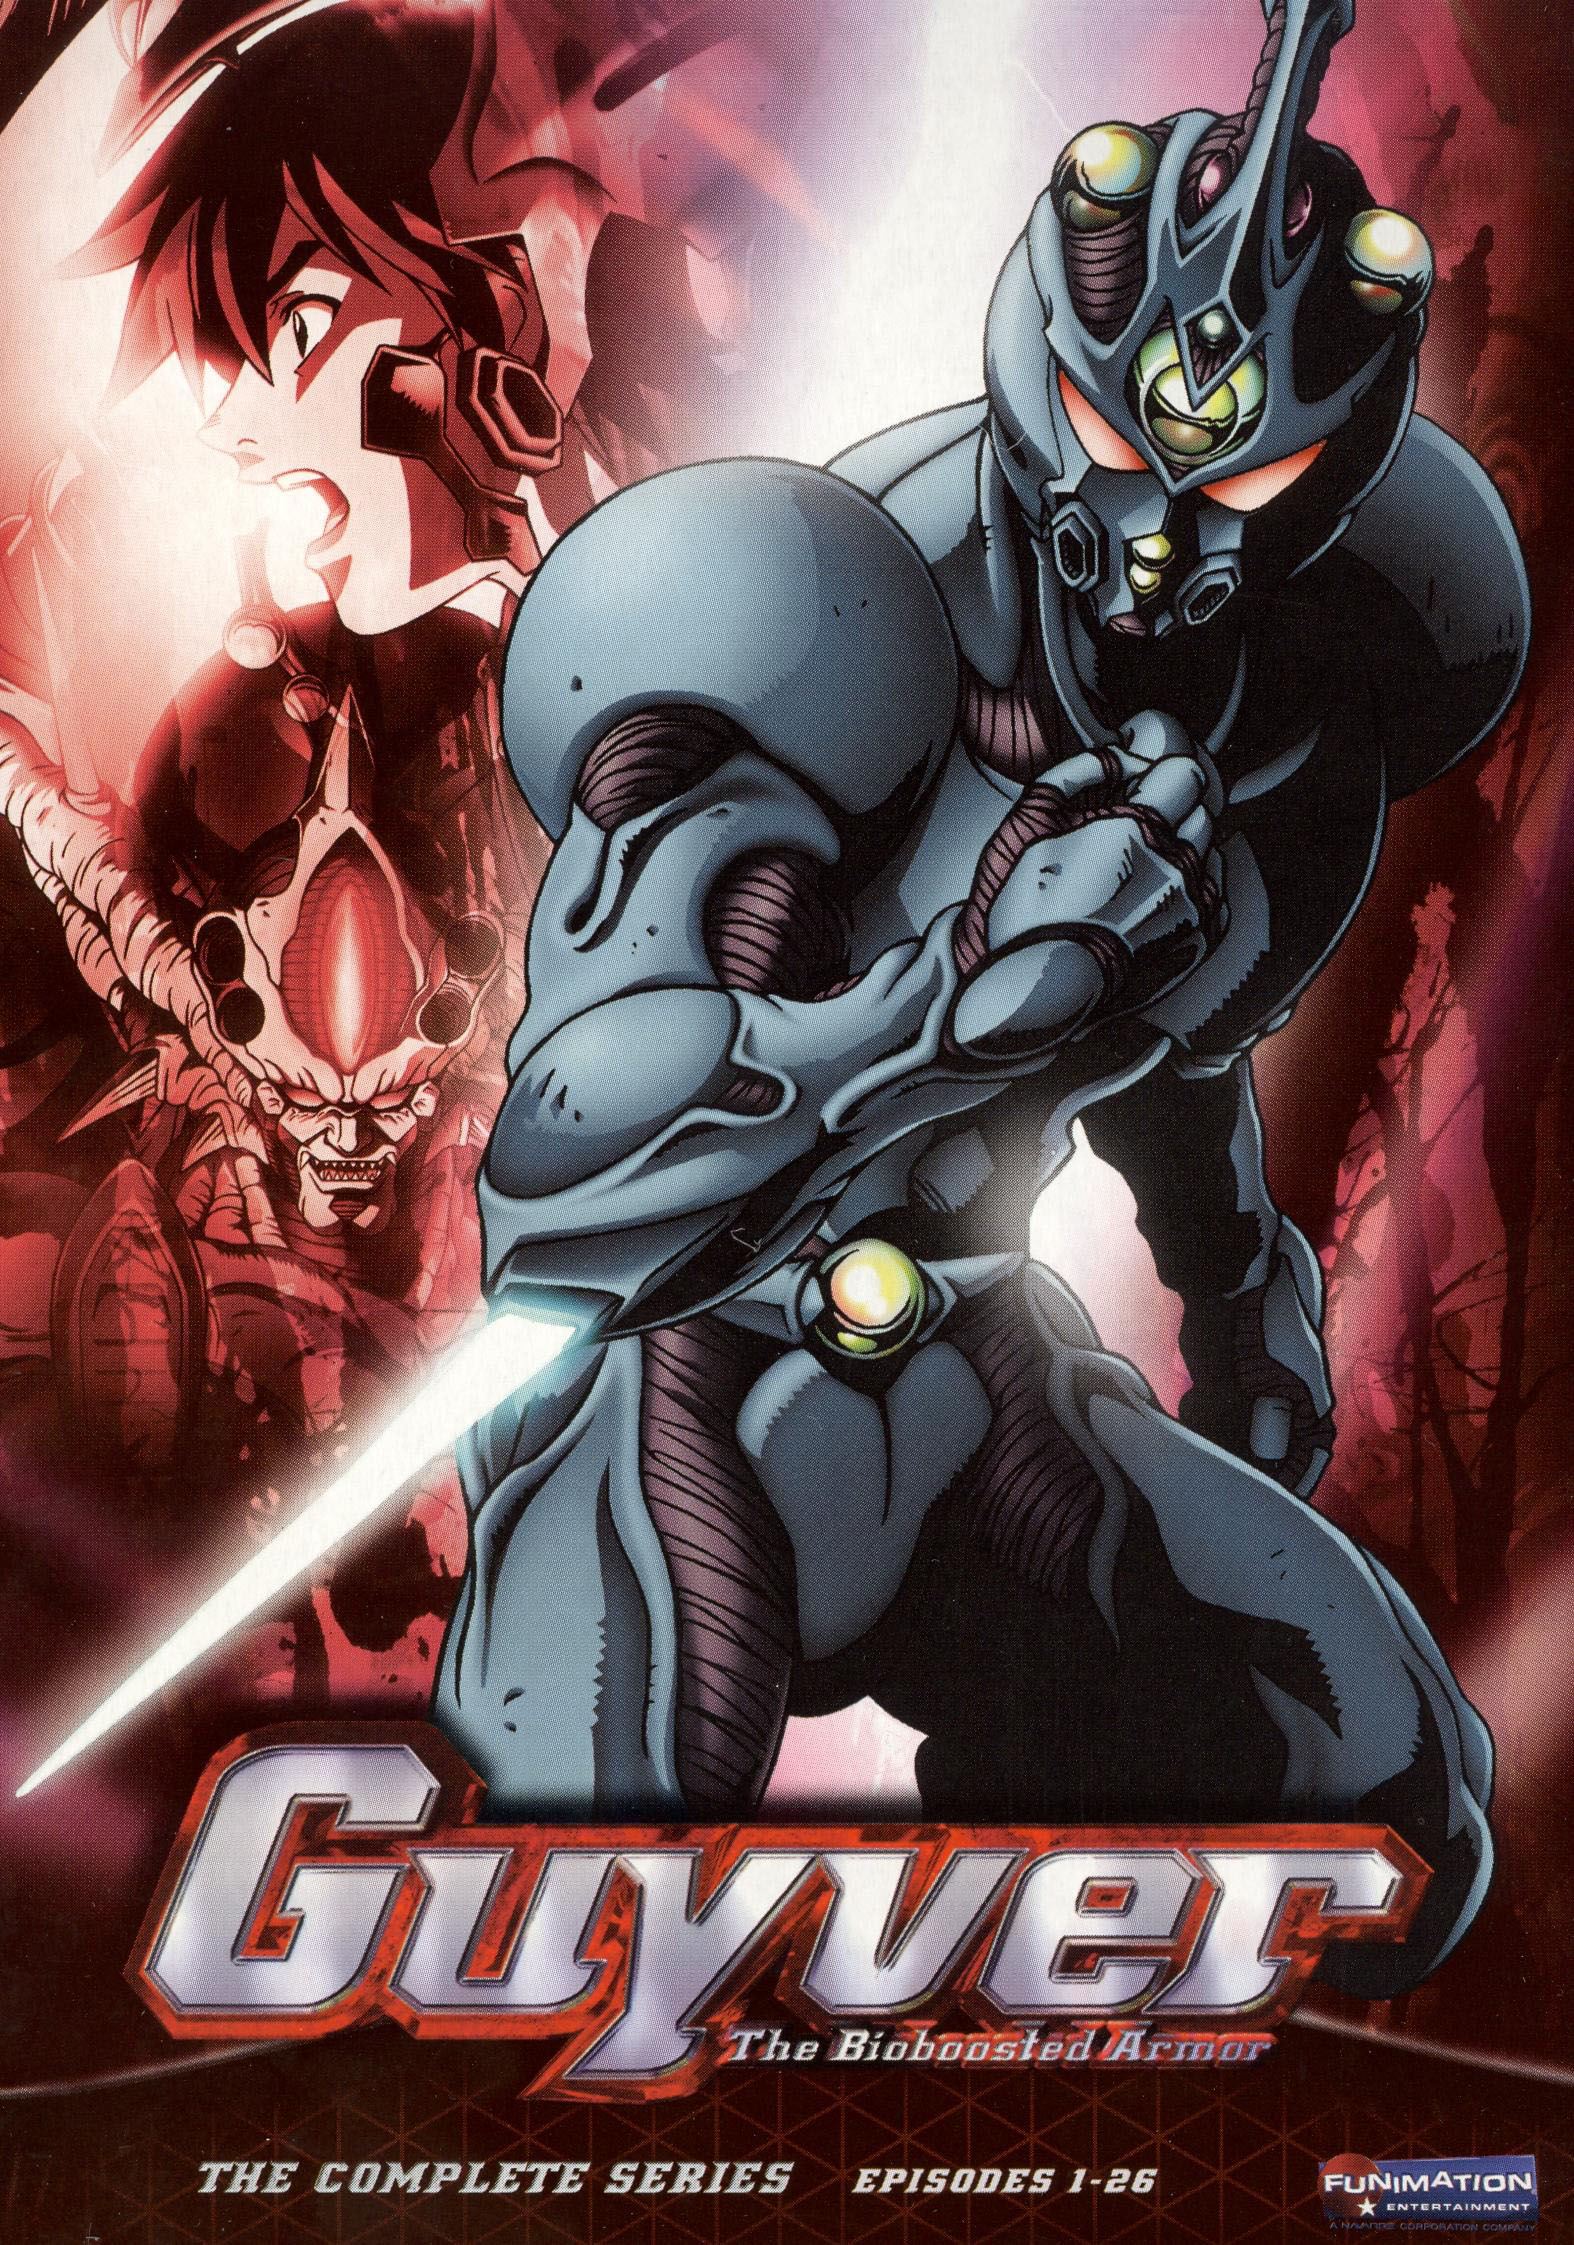 Guyver: The Bioboosted Armor (2005) - The Complete Series | Hi-Def